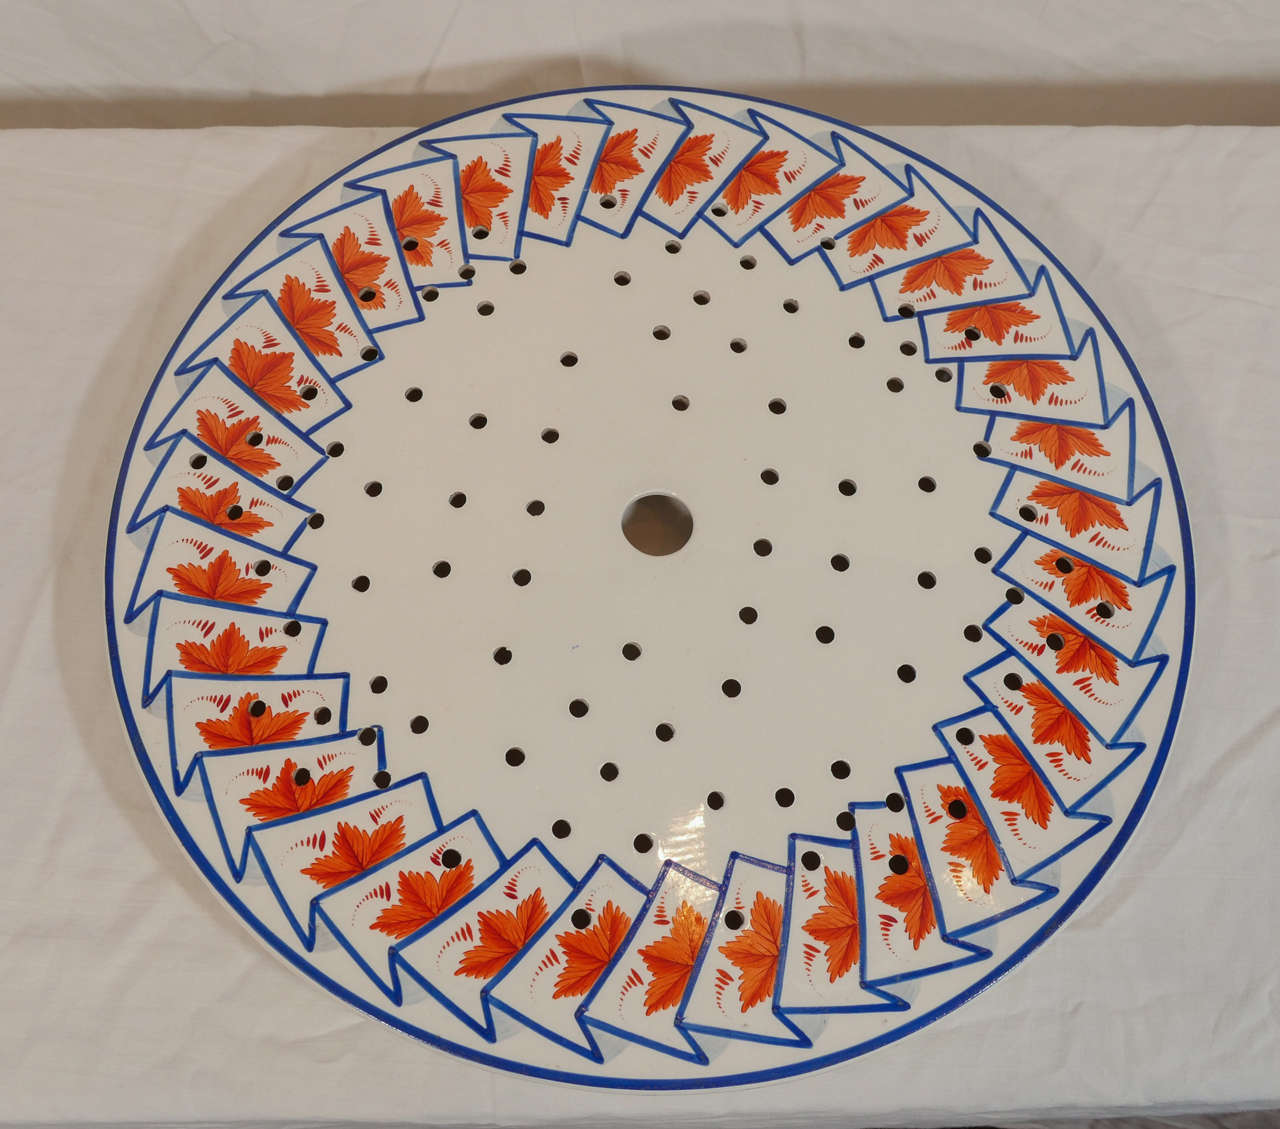 A pair of large pearlware drainers decorated to the border with cobalt blue accordion folds enclosing orange leaves. This rare pattern has a modern look.
In this pattern we also have in the shop:
A large oval platter, 21.75